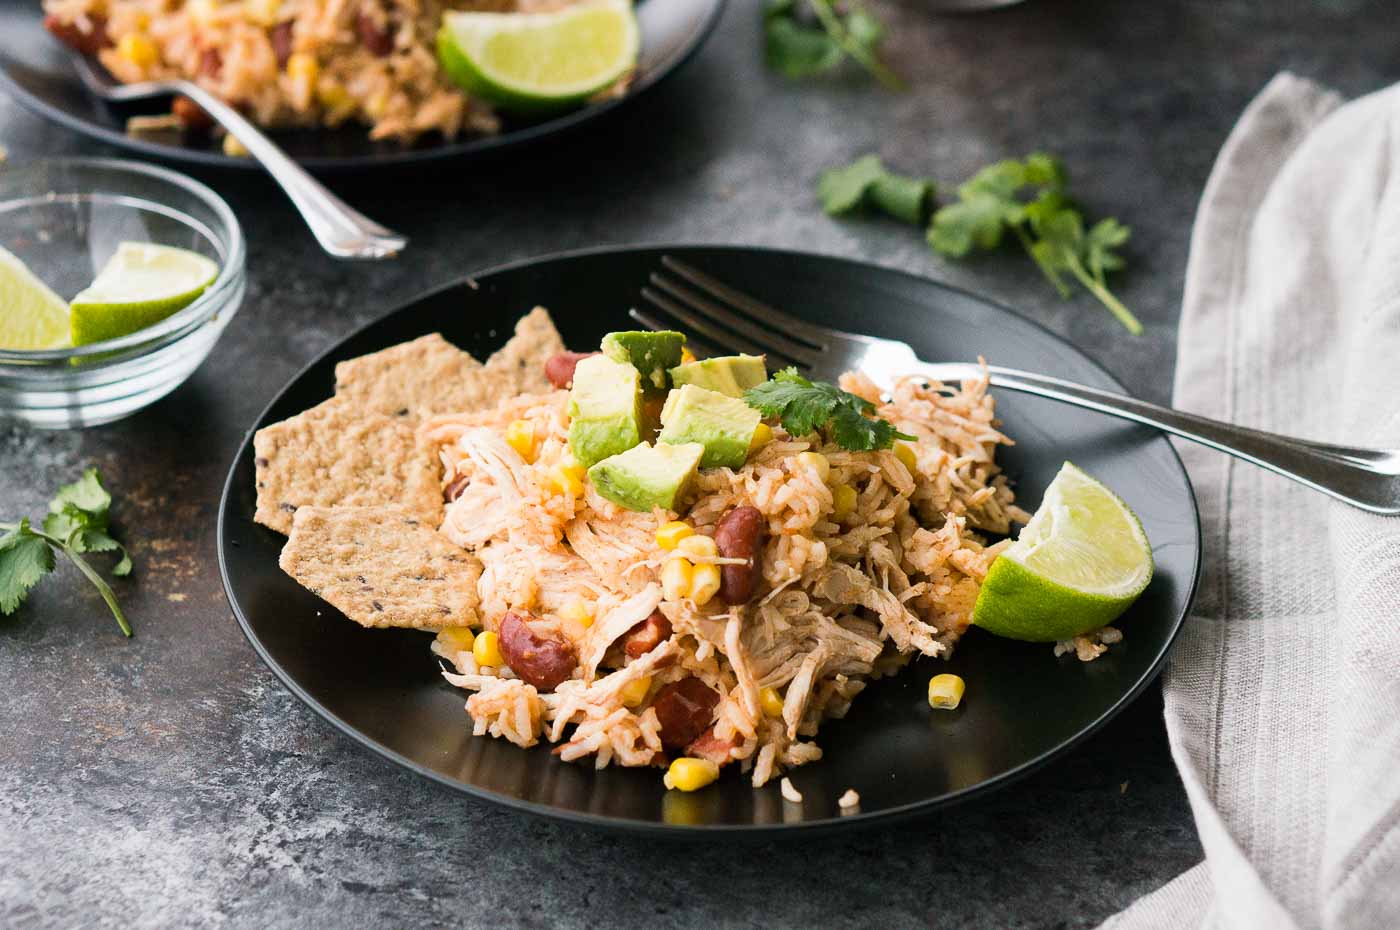 Instant Pot Southwestern Chicken and Rice